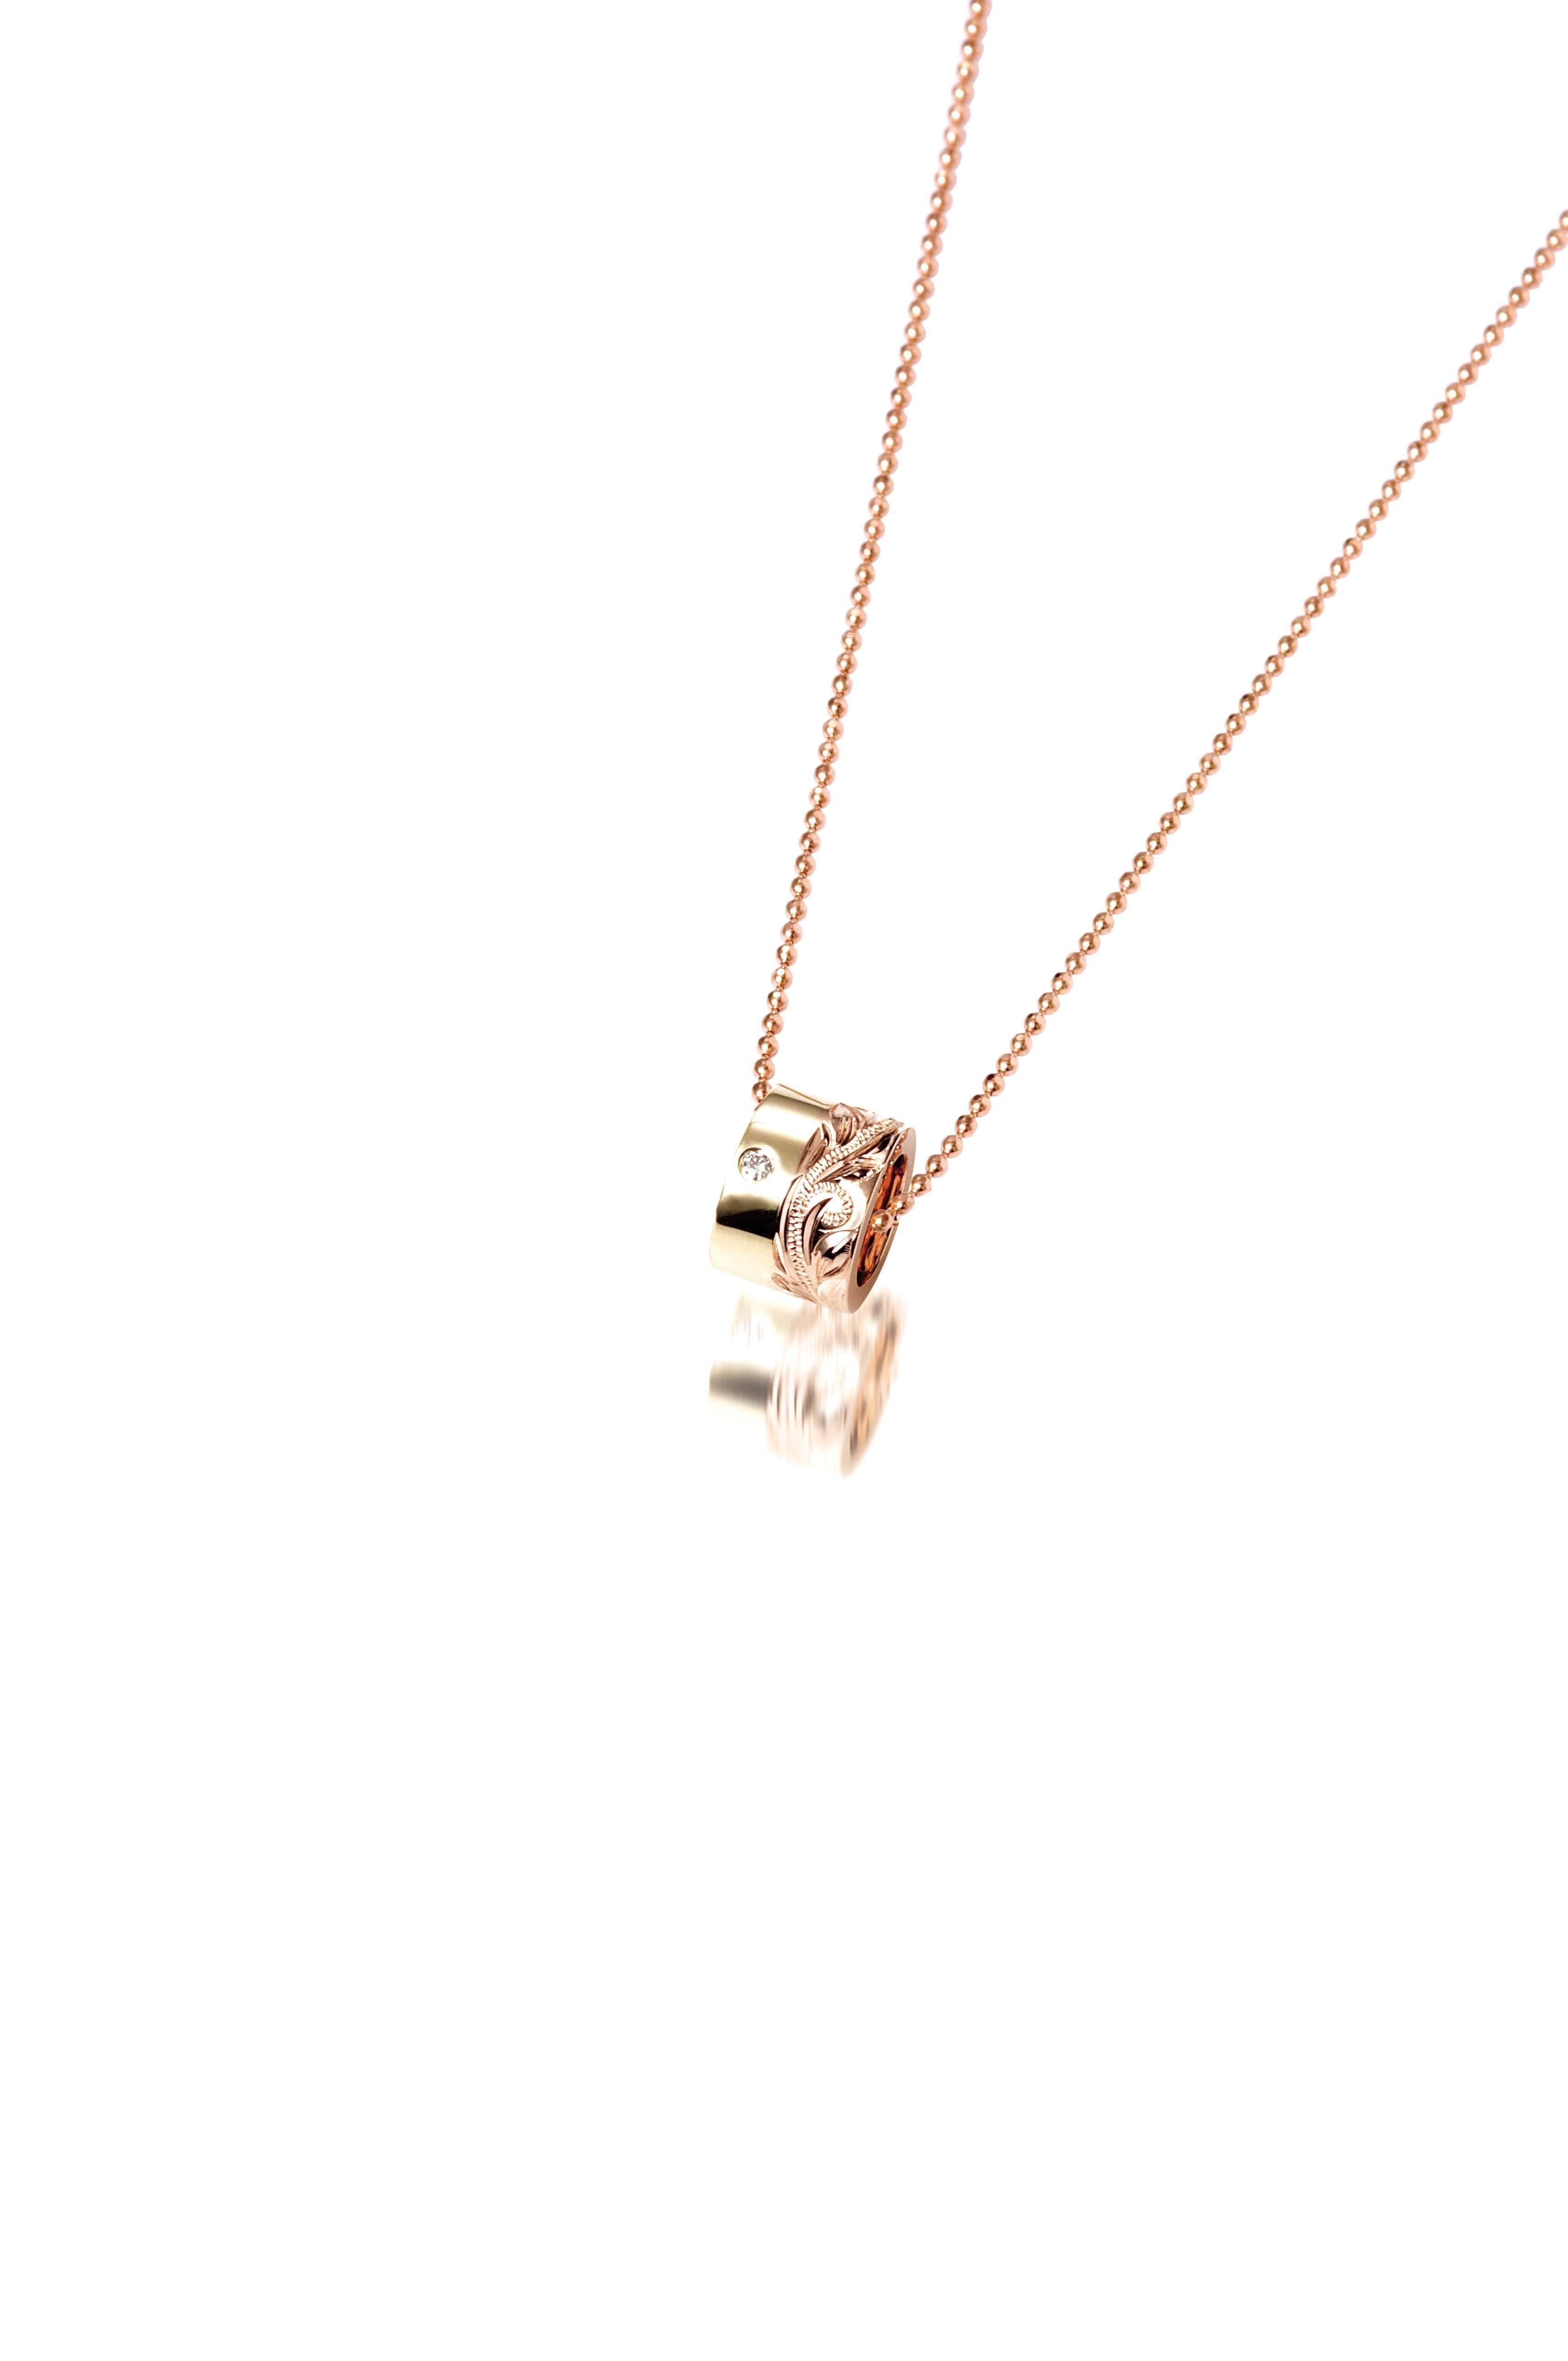 This picture shows a 14k yellow and rose gold two-tone barrel pendant with hand engravings and a diamond.